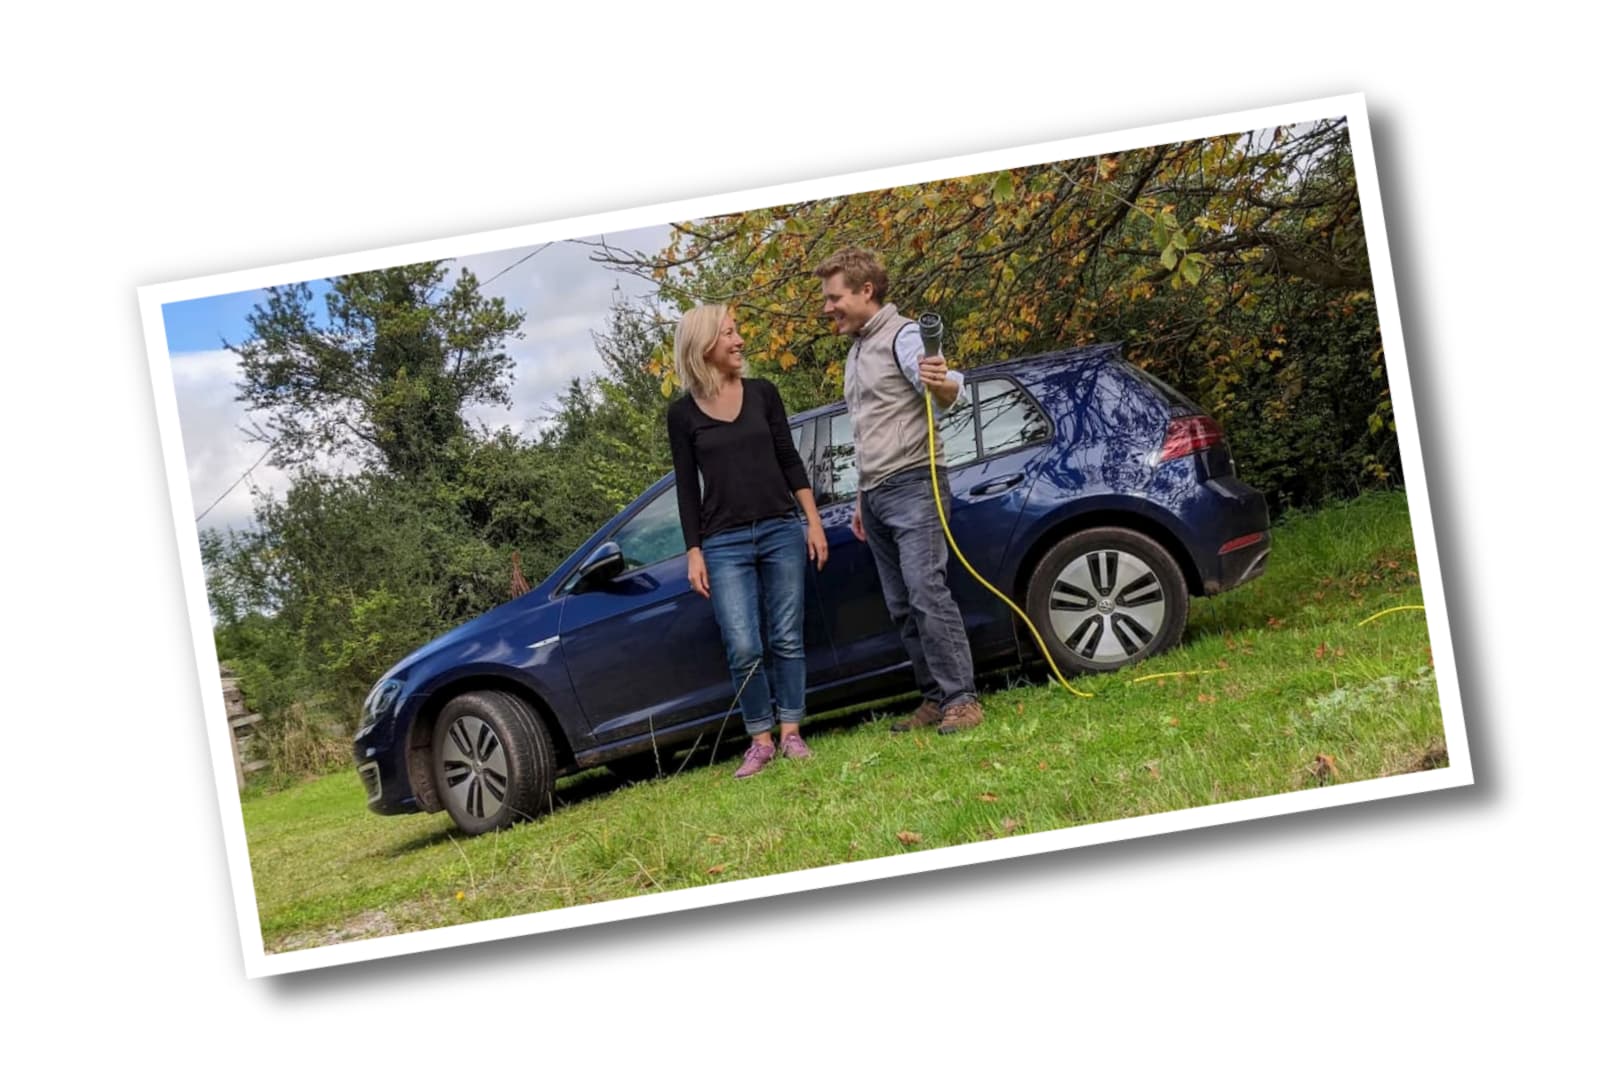 Laura and Mat Thomson, Founders of Love my EV